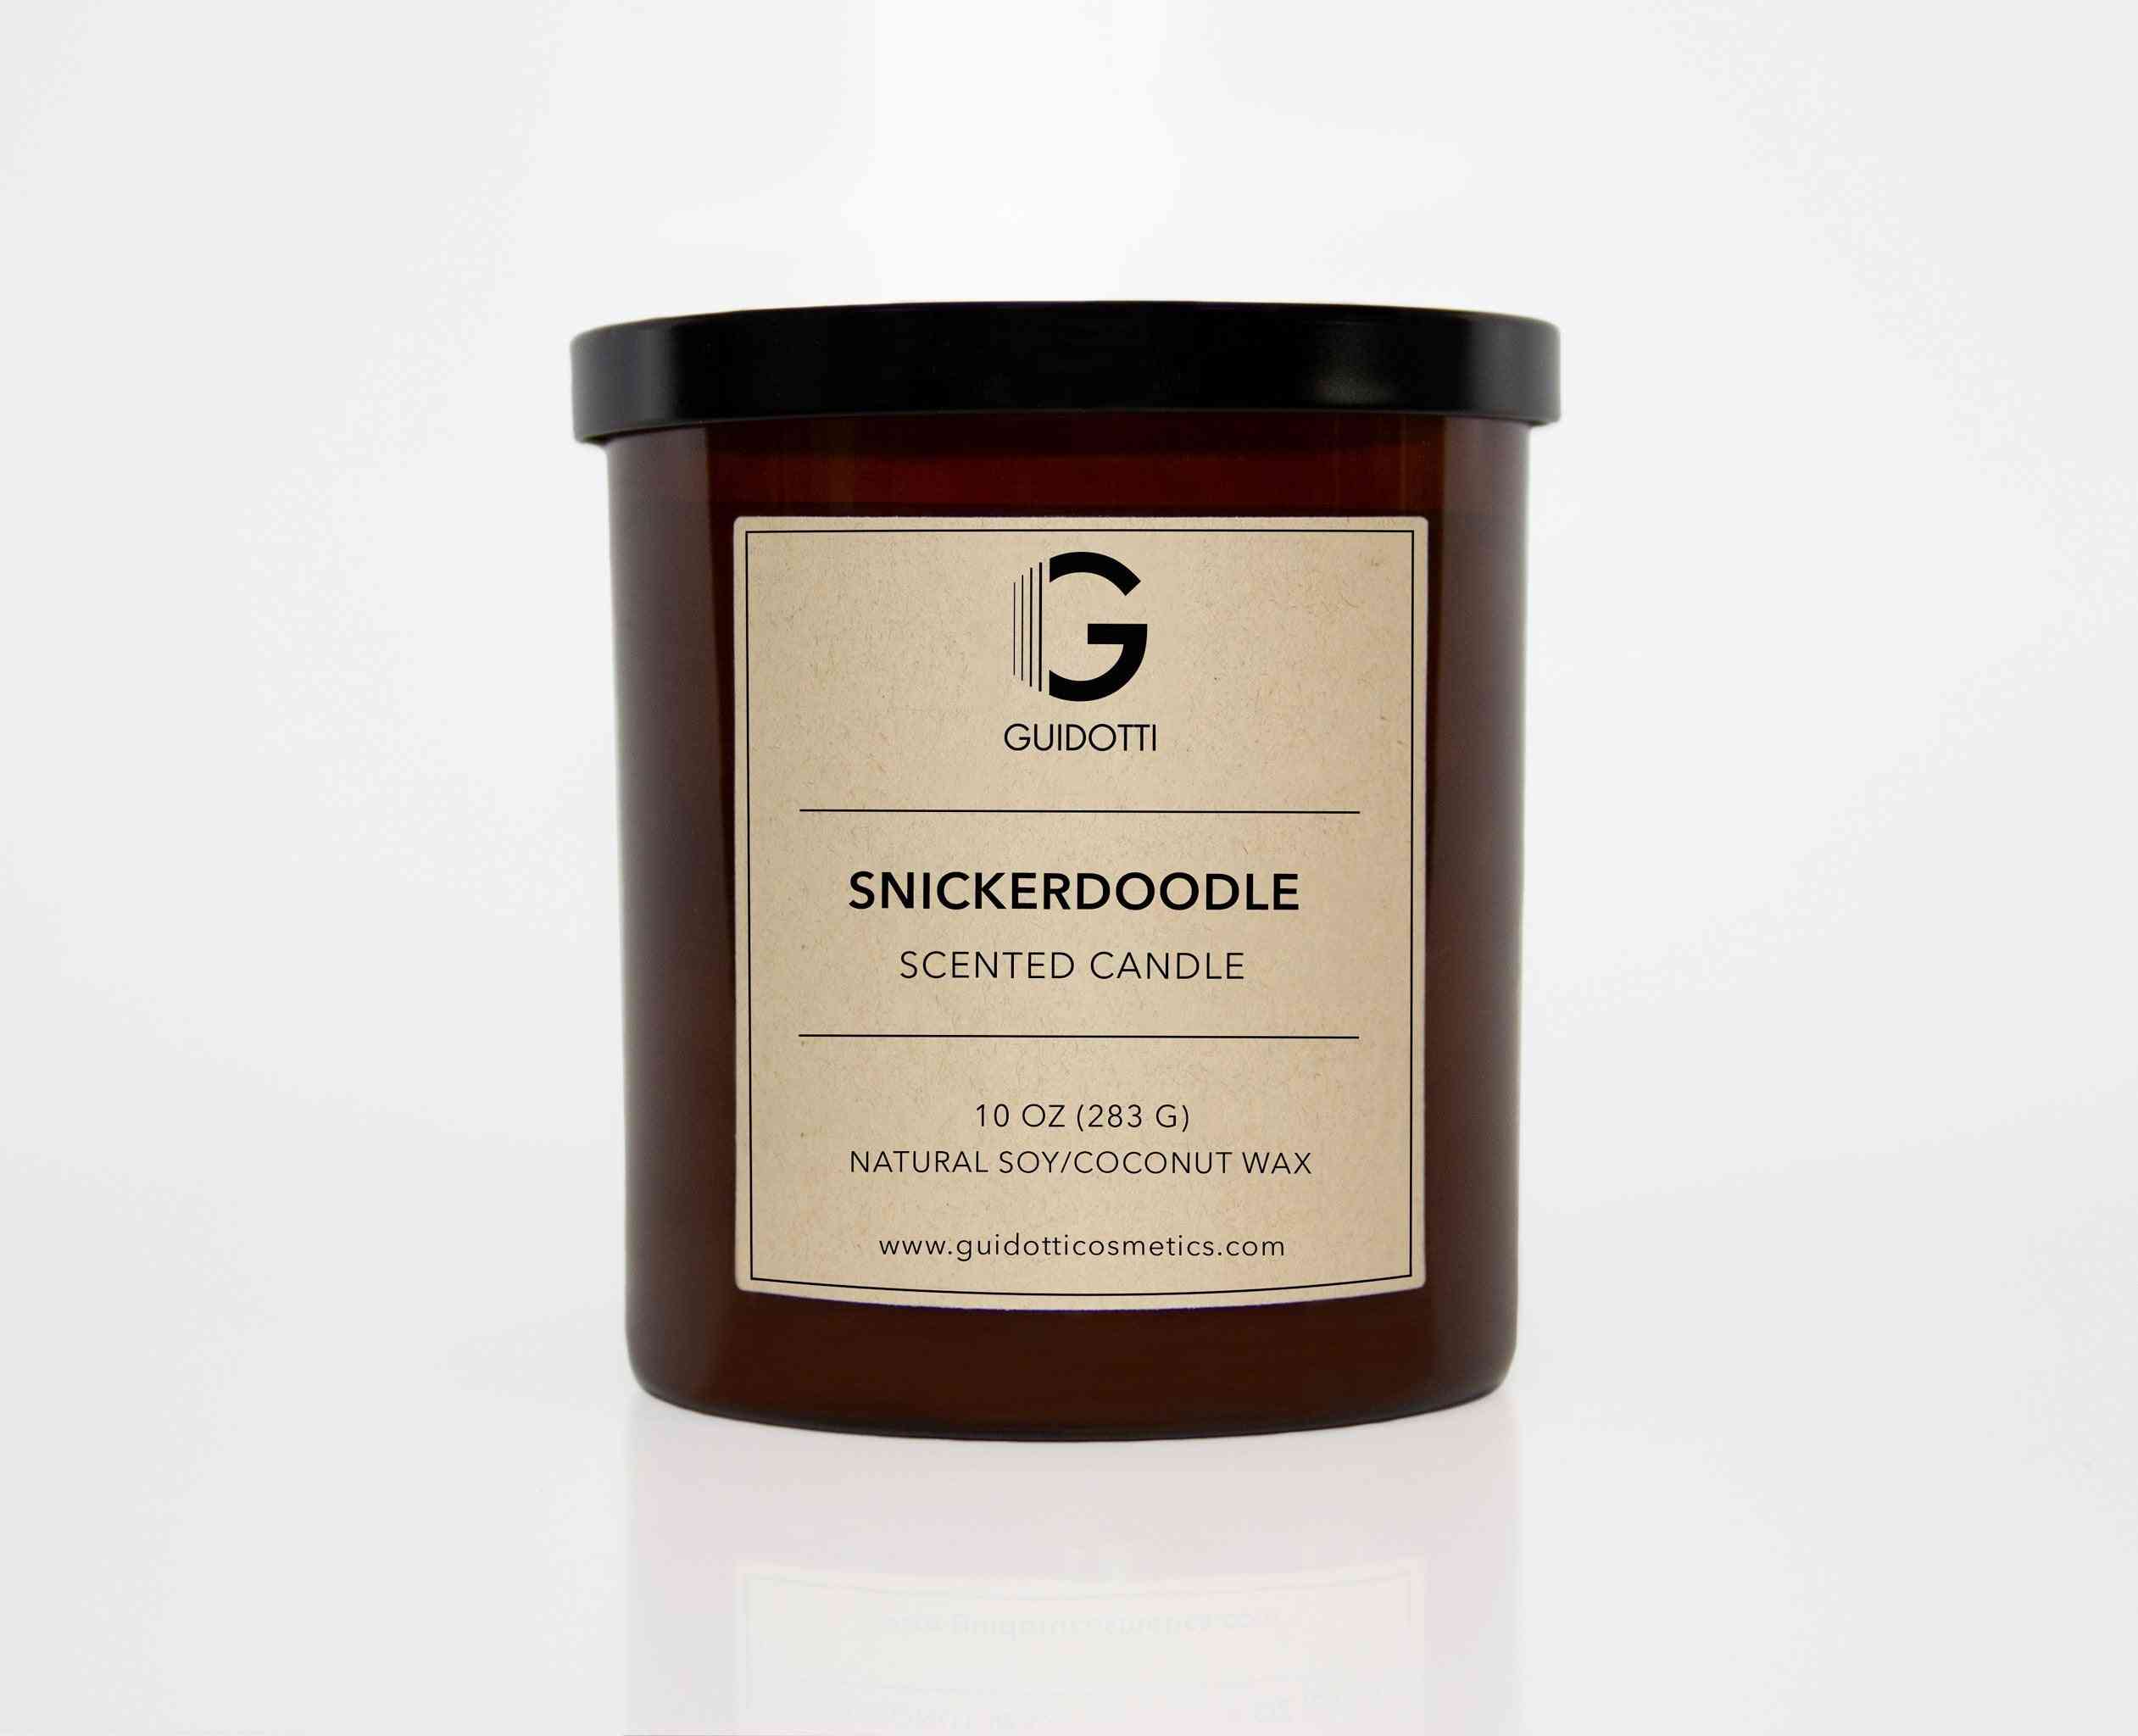 Snickerdoodle Scented Soy Candle